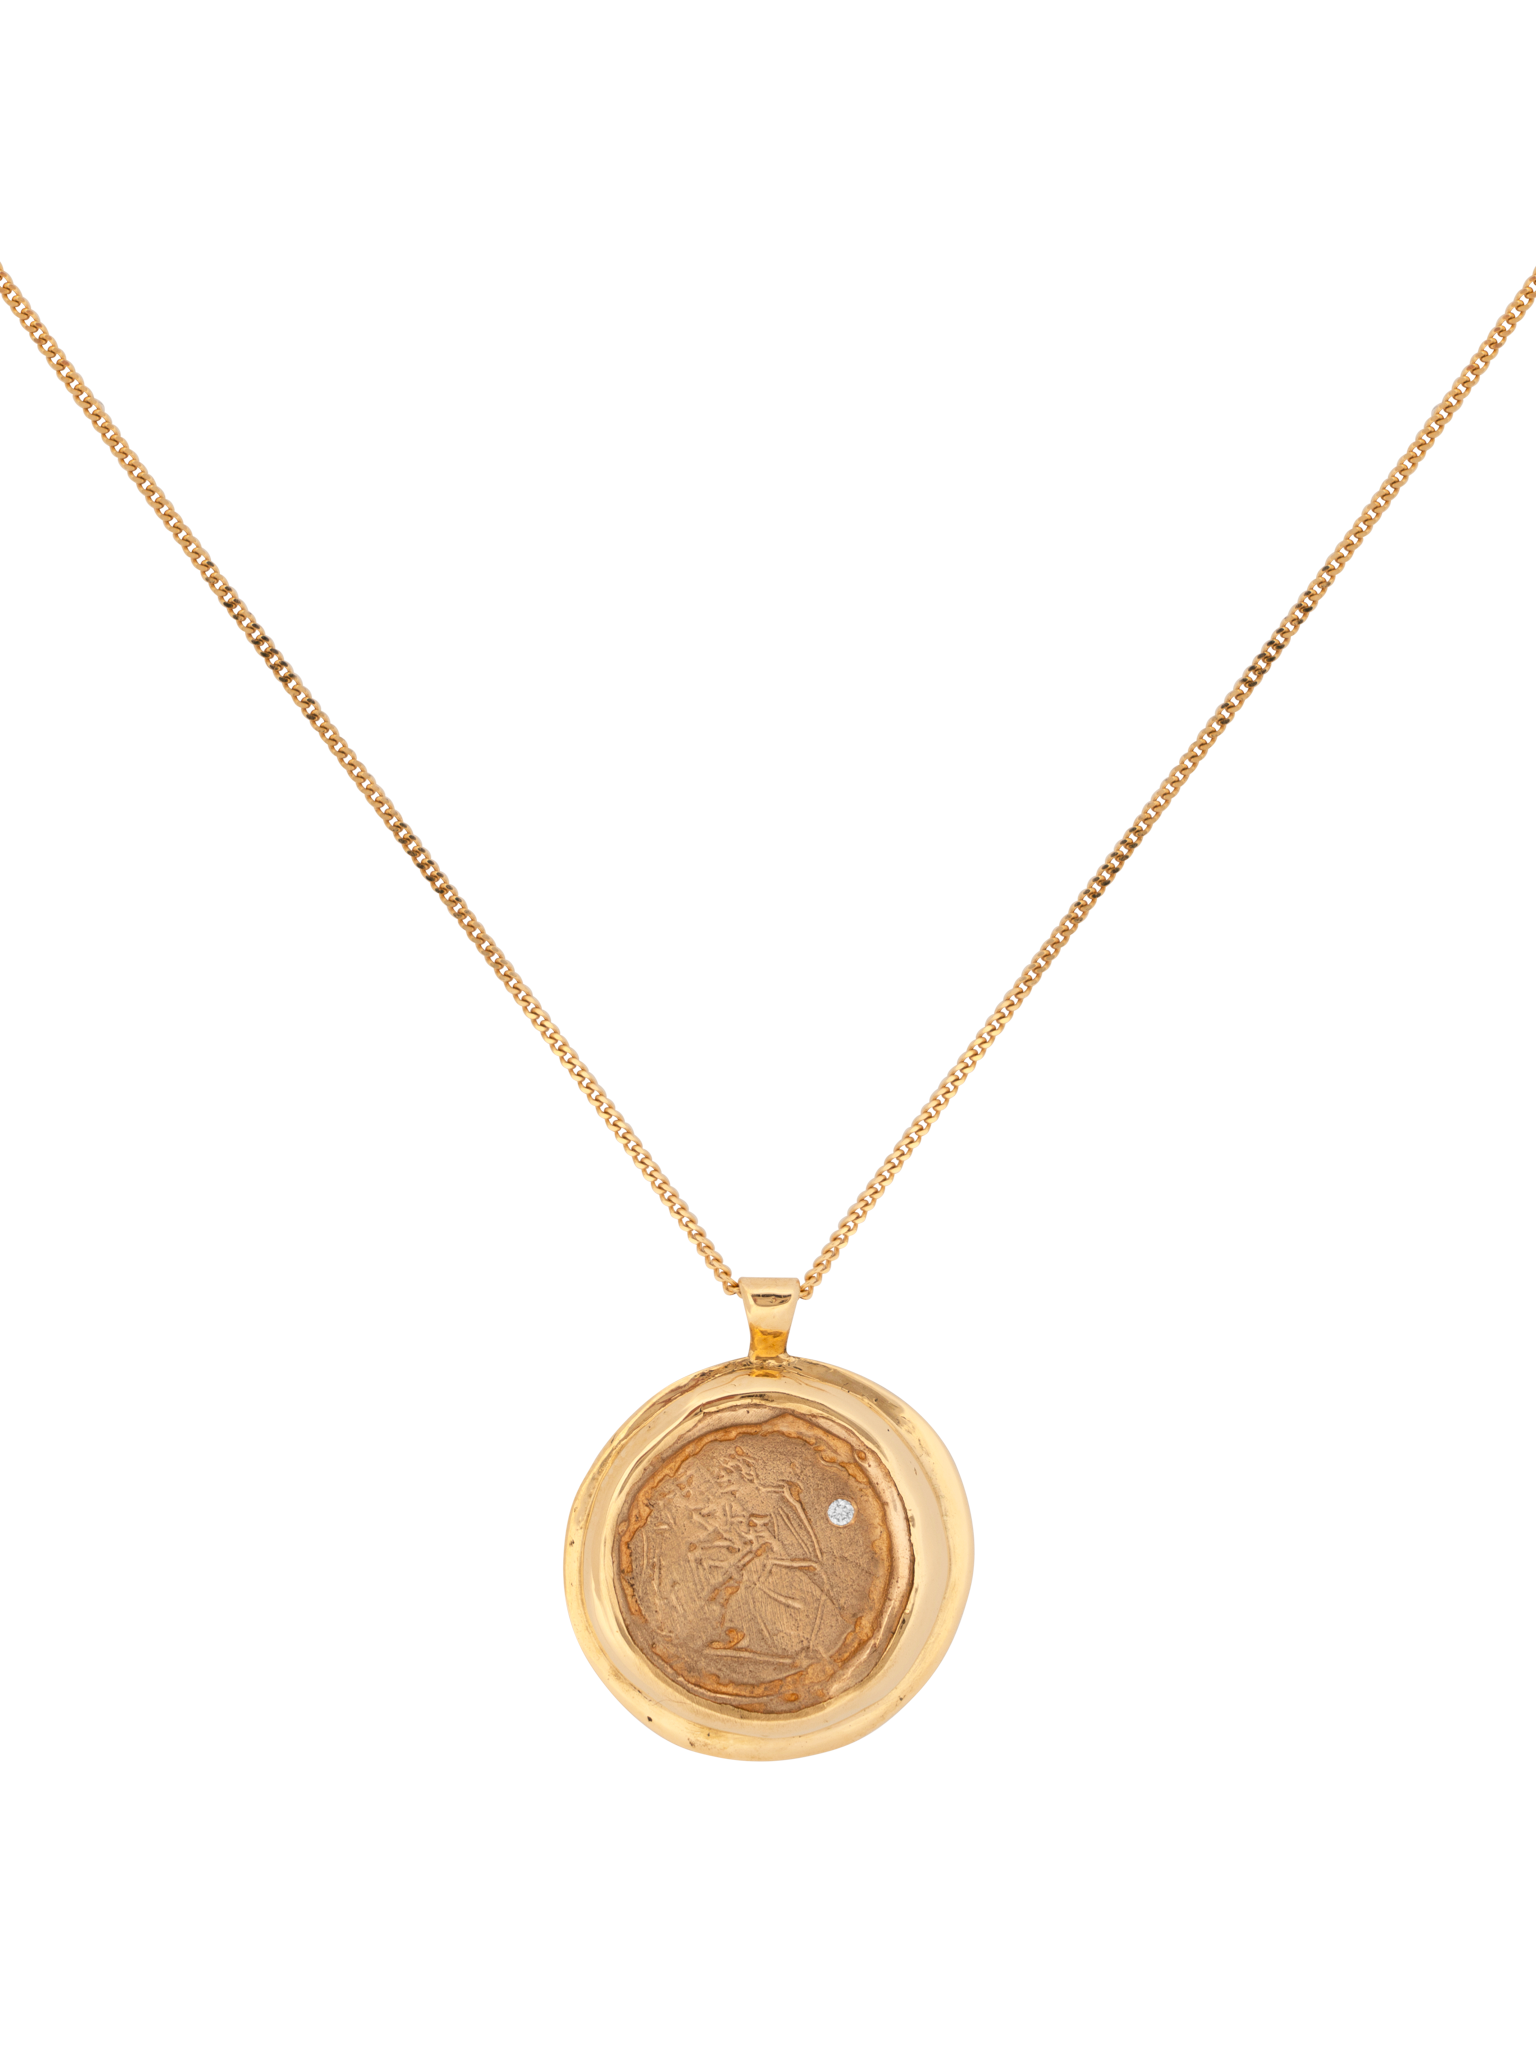 Pan necklace